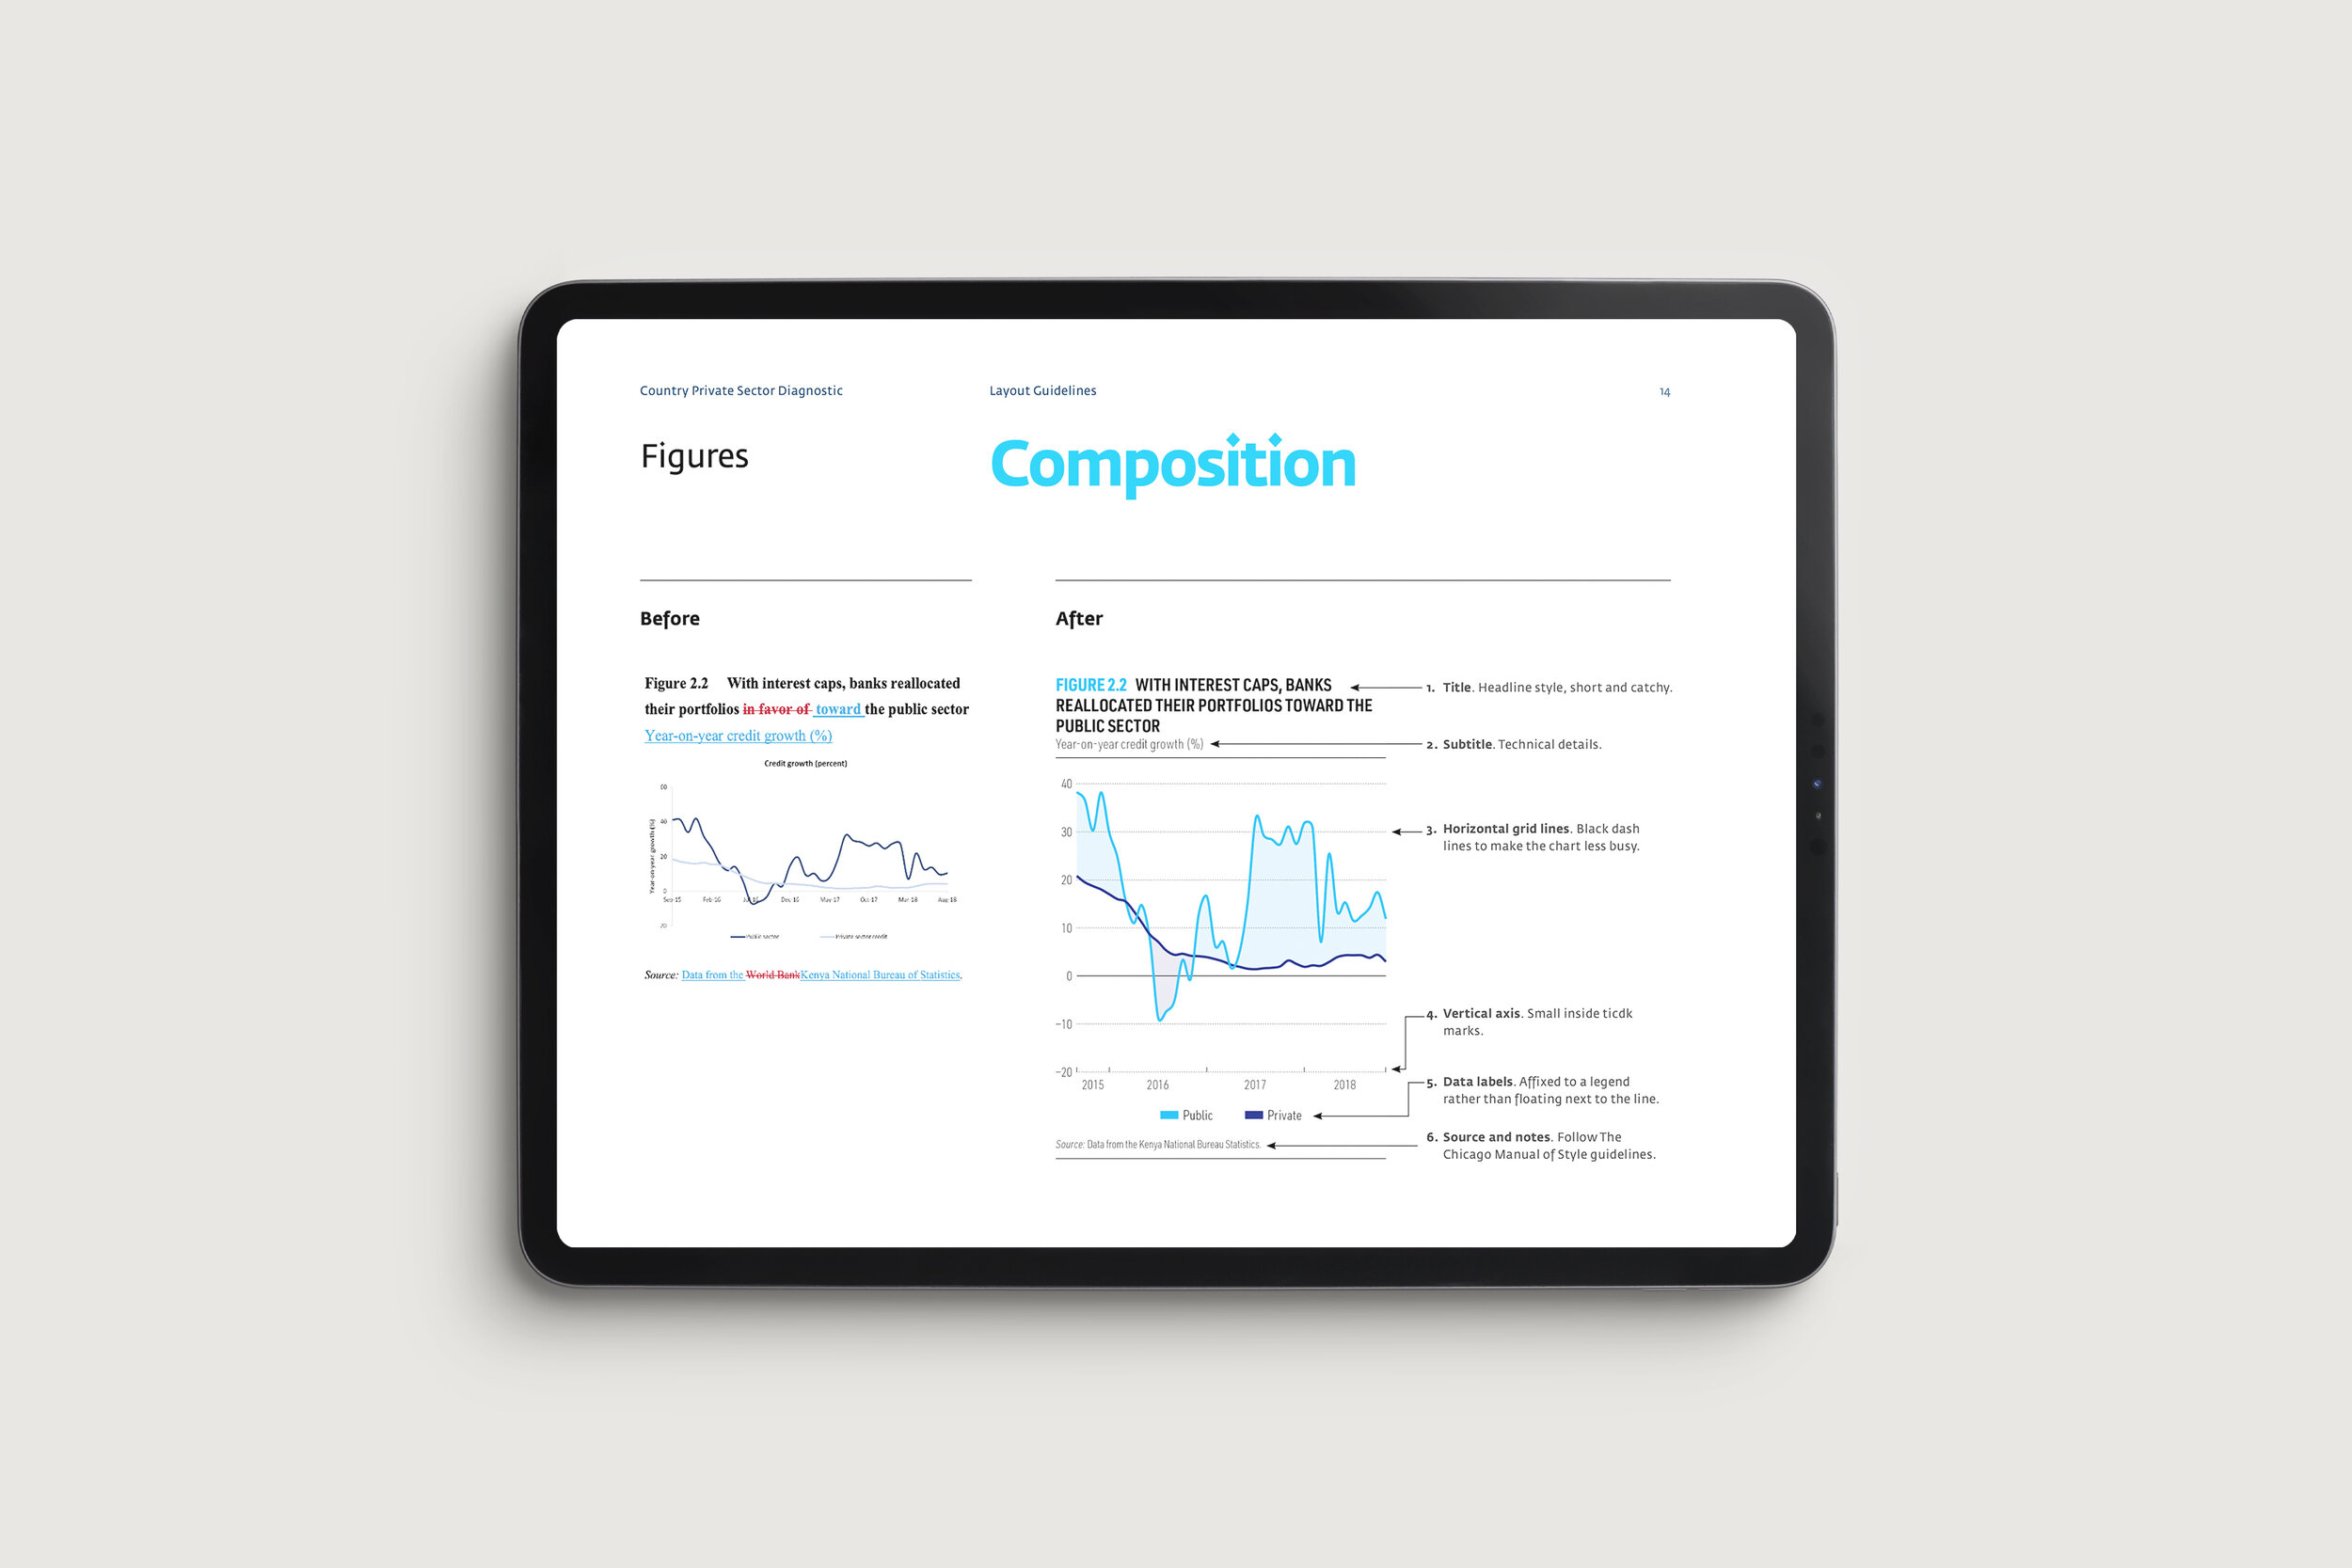 Visualization design guidelines produced by Designed for Humans for the International Finance Corporation Country Private Sector Diagnostic.